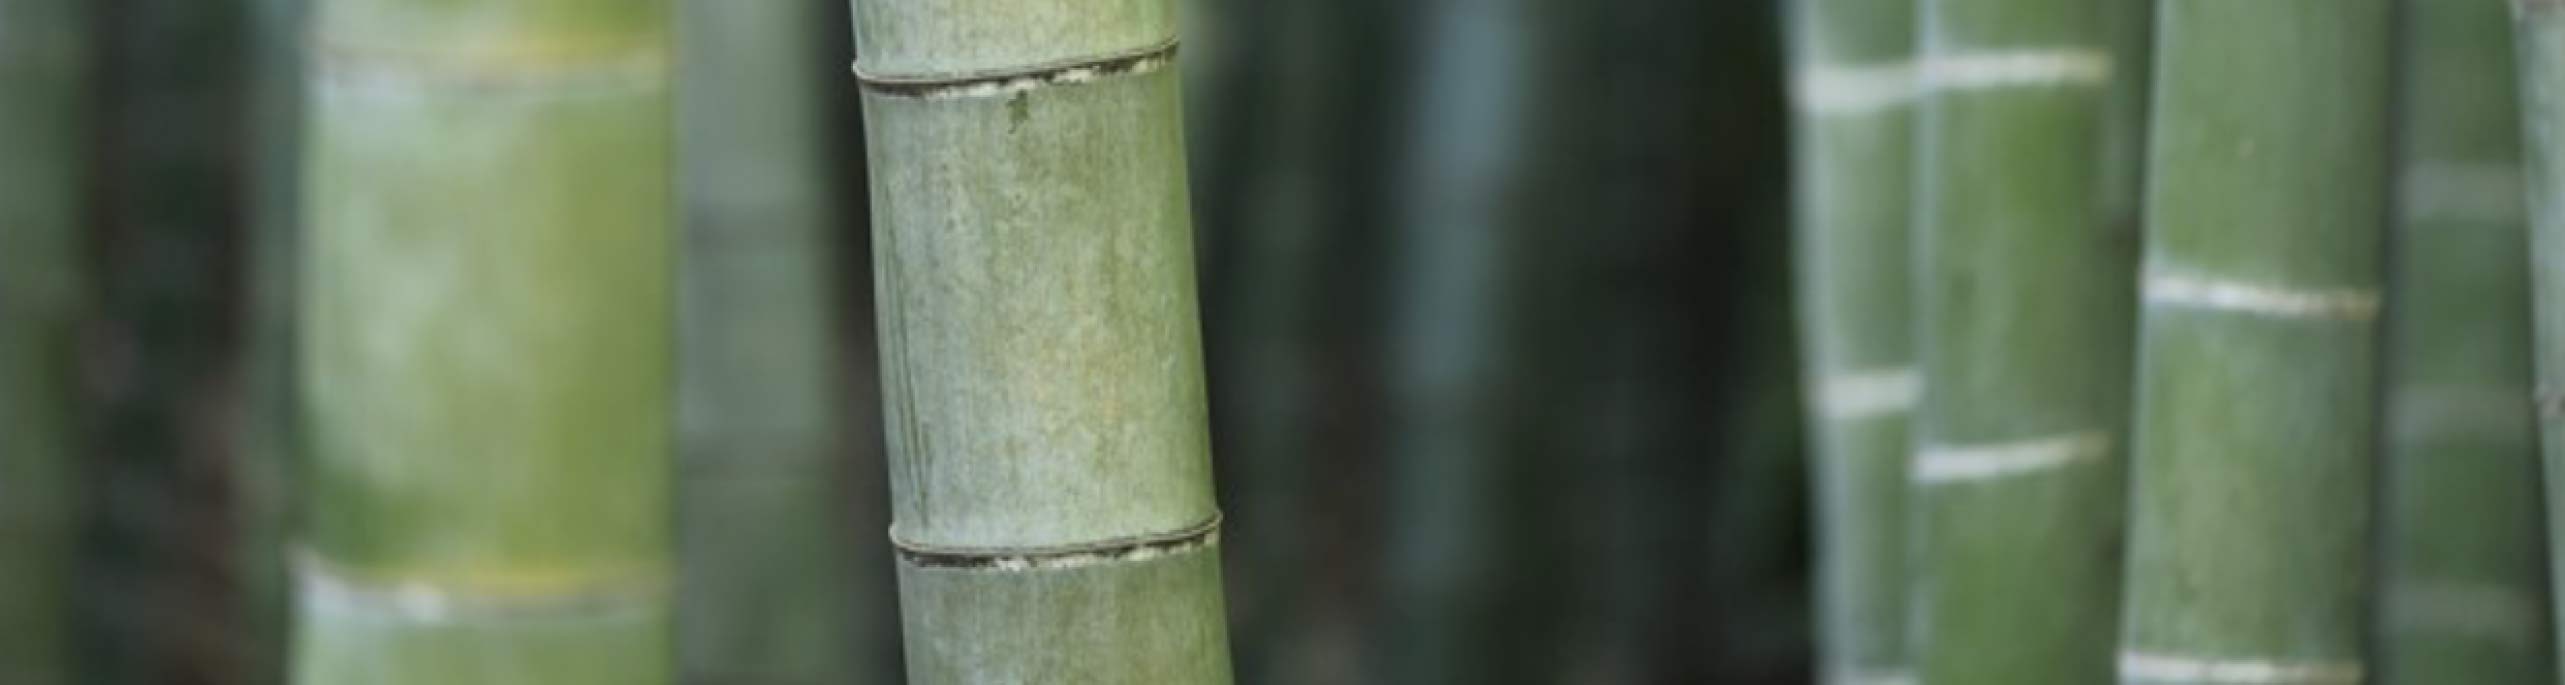 bamboo stalks in forest